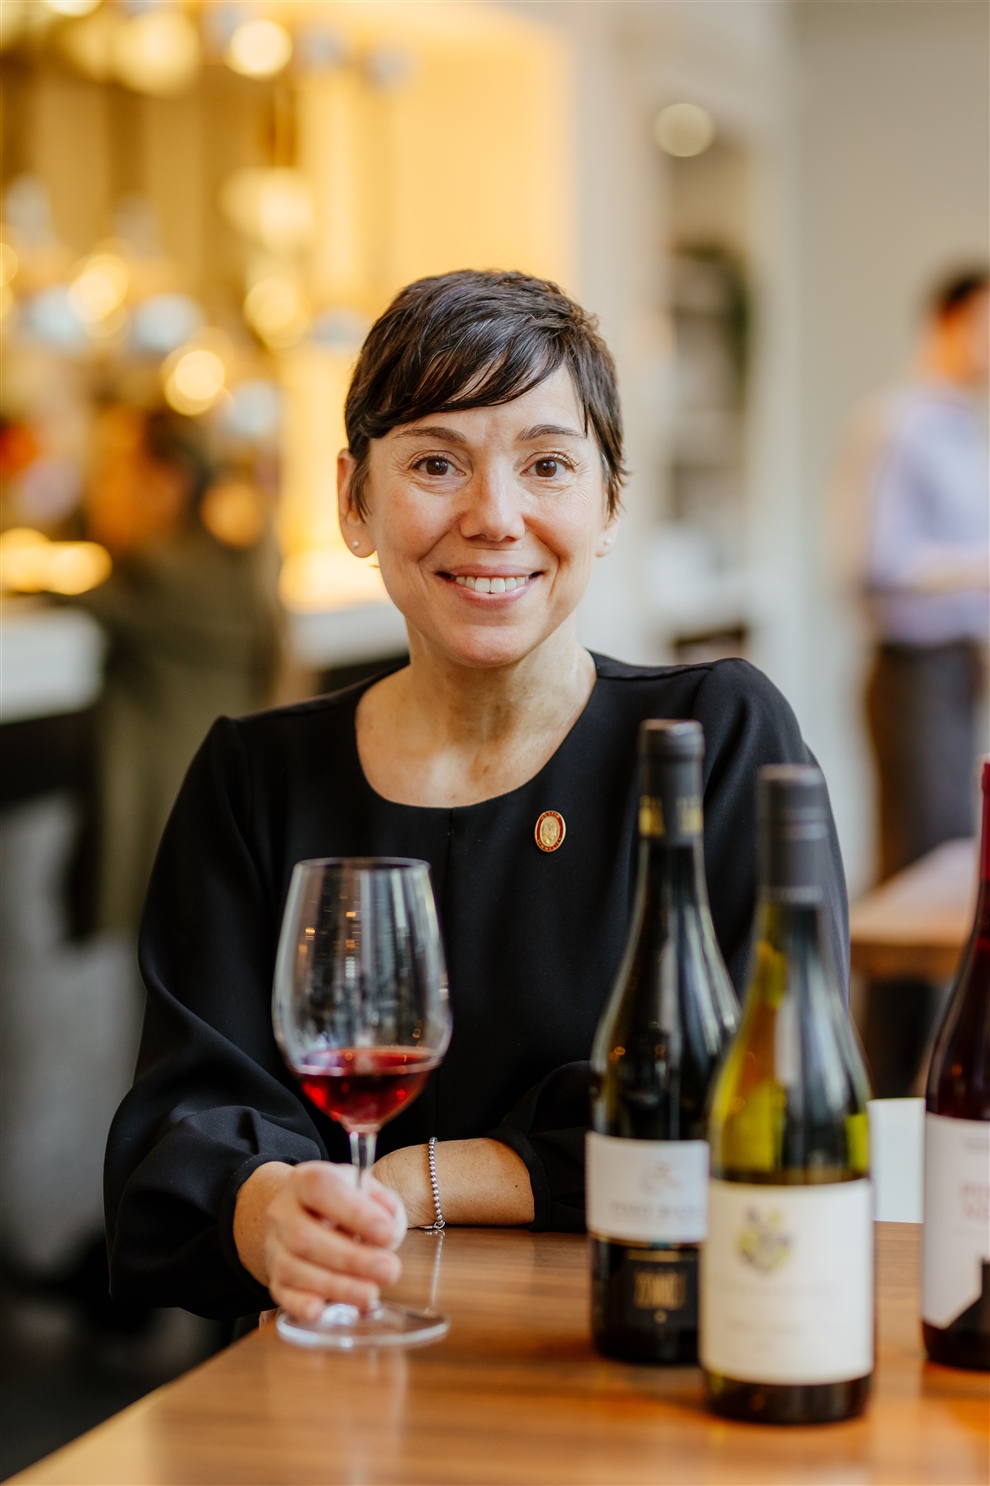 Woman in black dress drinking wine and smiling at the camera